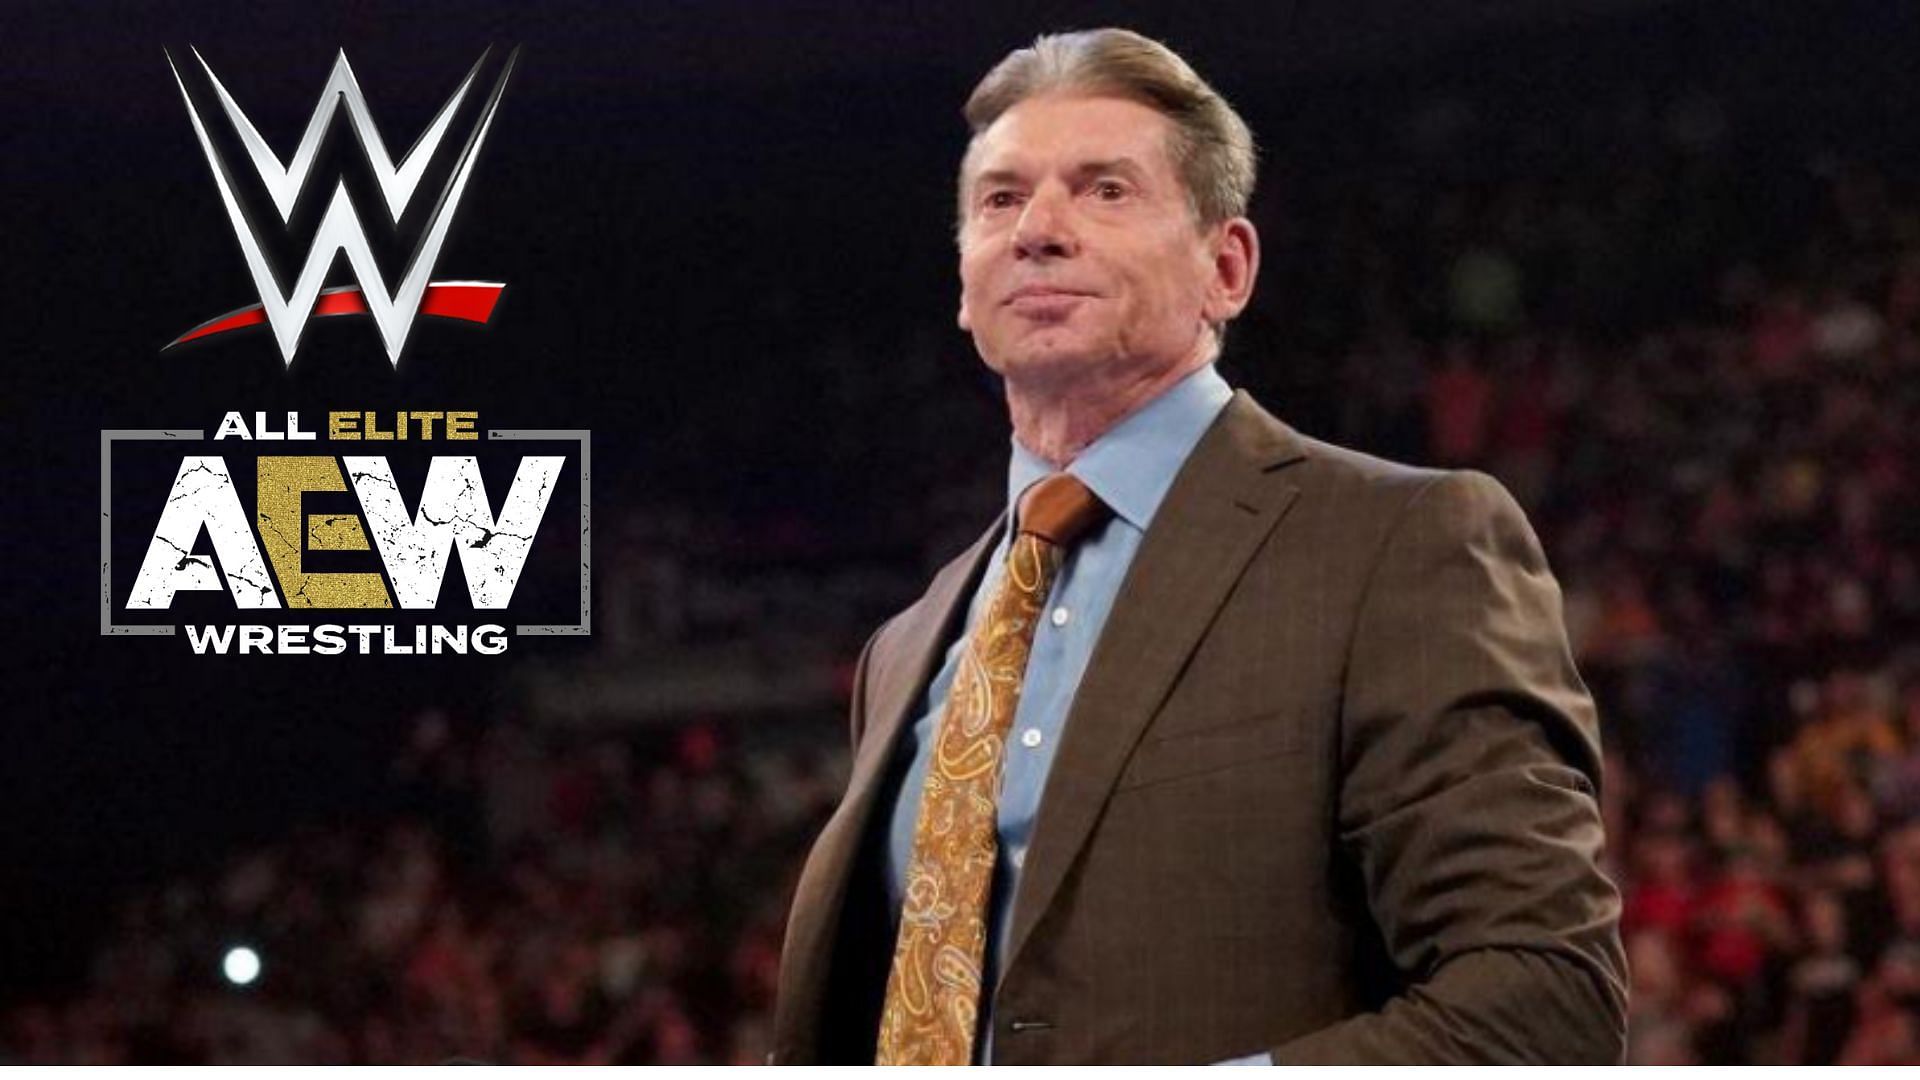 Vince McMahon during a WWE TV episode